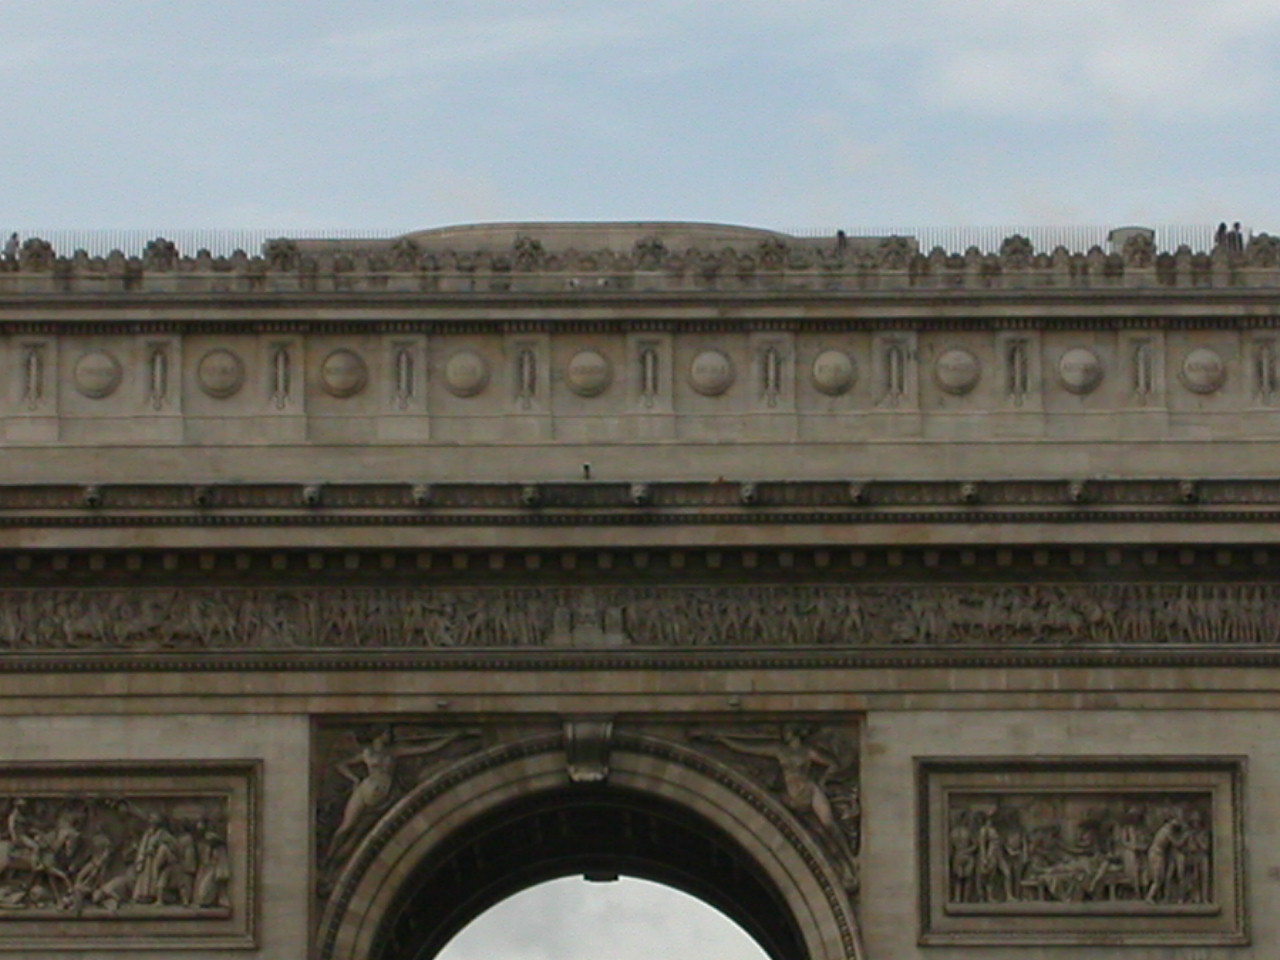 Top of The Arc